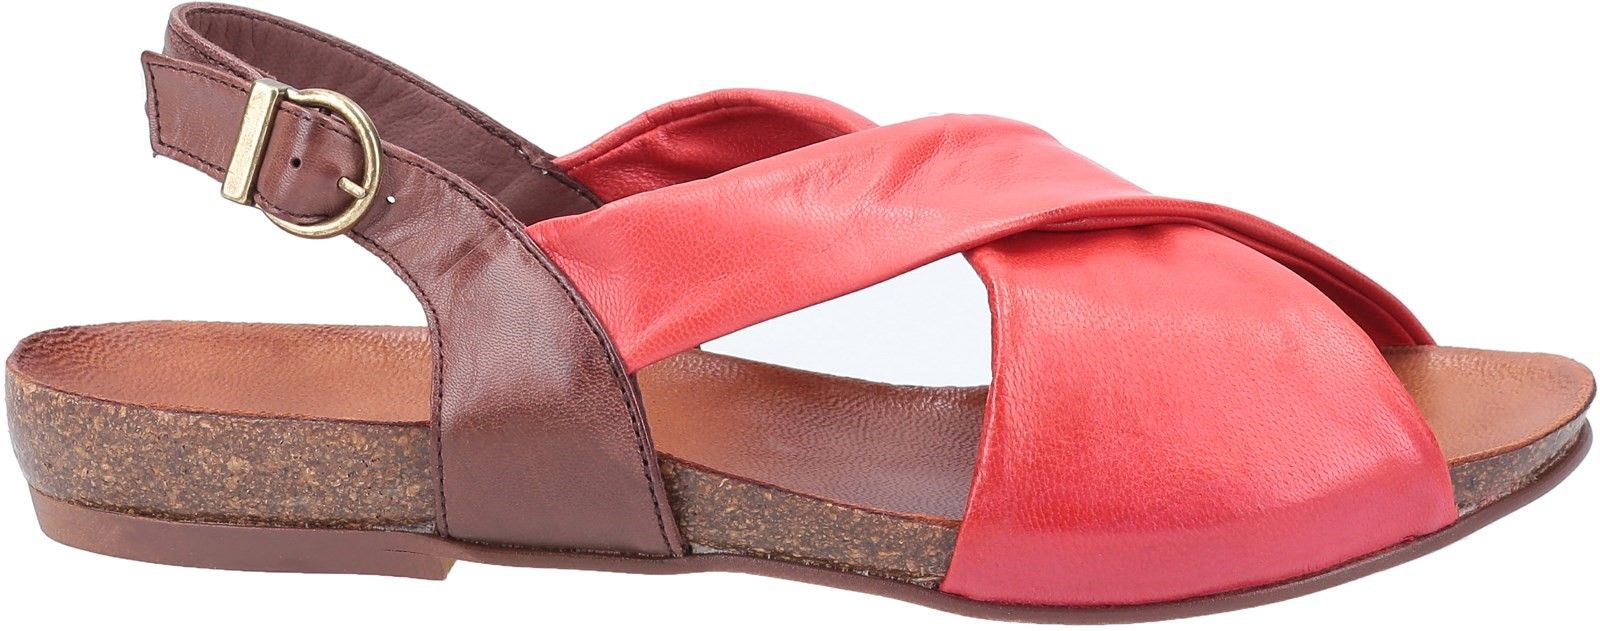 Riva Pontiella is a womens stylish and versatile flat slingback summer sandal with soft leather uppers in a crossover design, contrast colour heel strap with buckle closure and leather covered moulded footbed for comfort.